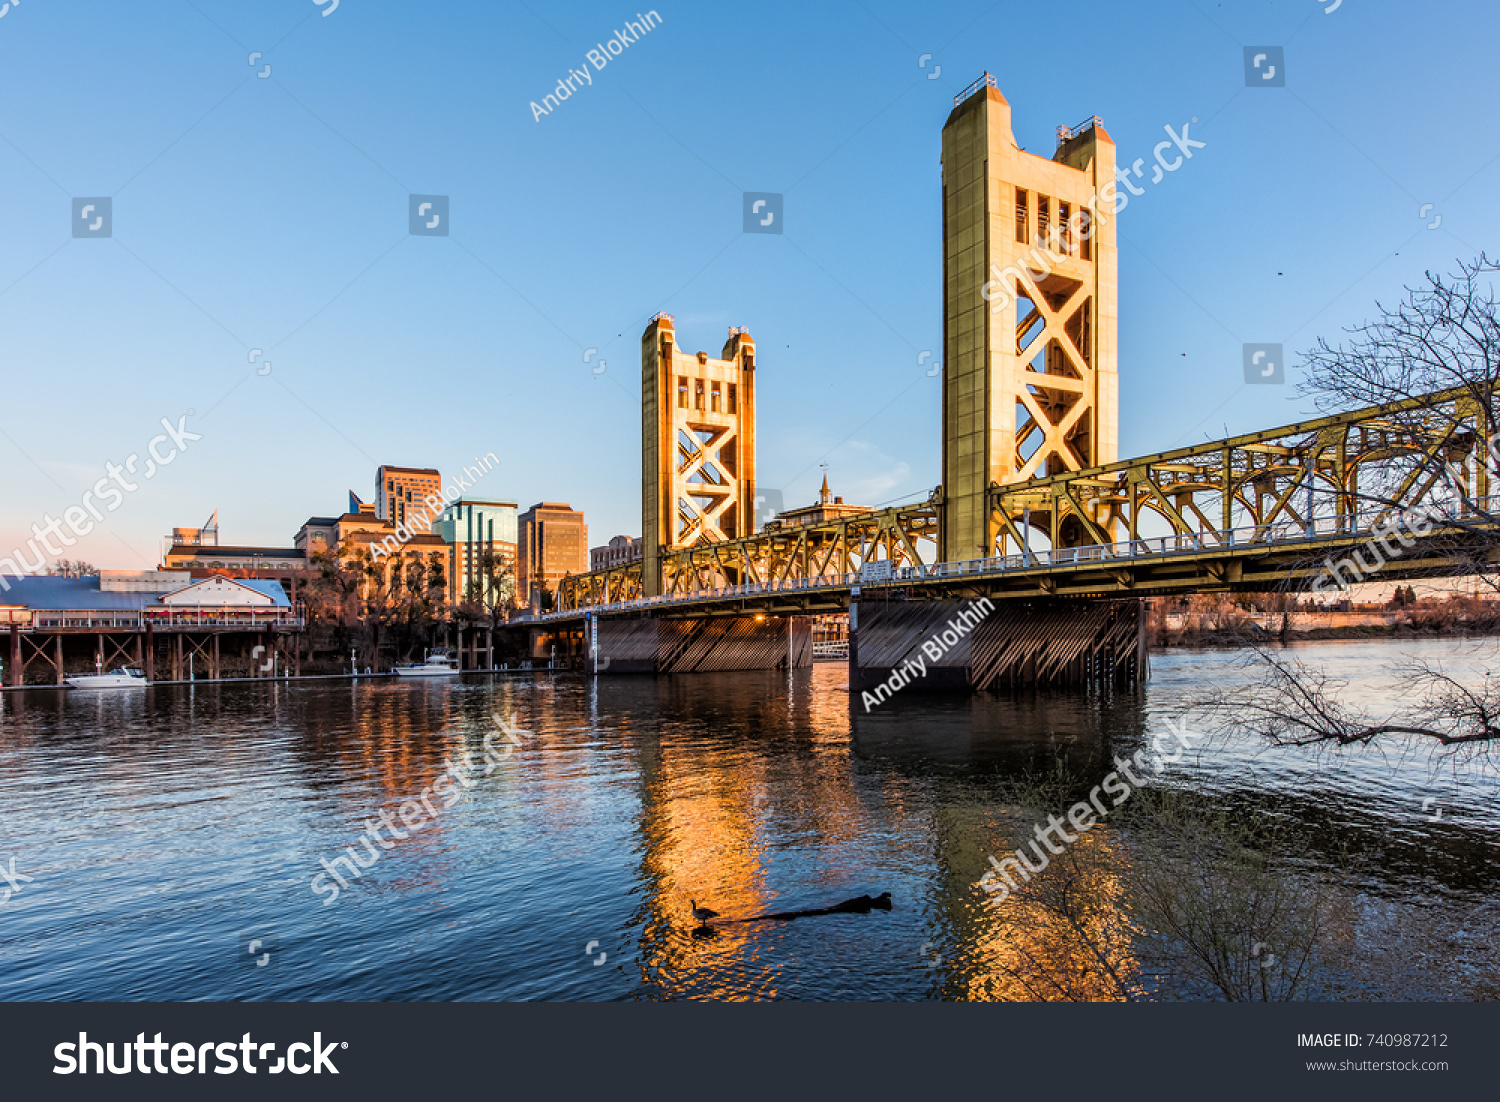 Gold Tower Bridge in Sacramento California during blue sunset with downtown and goose on floating log #740987212